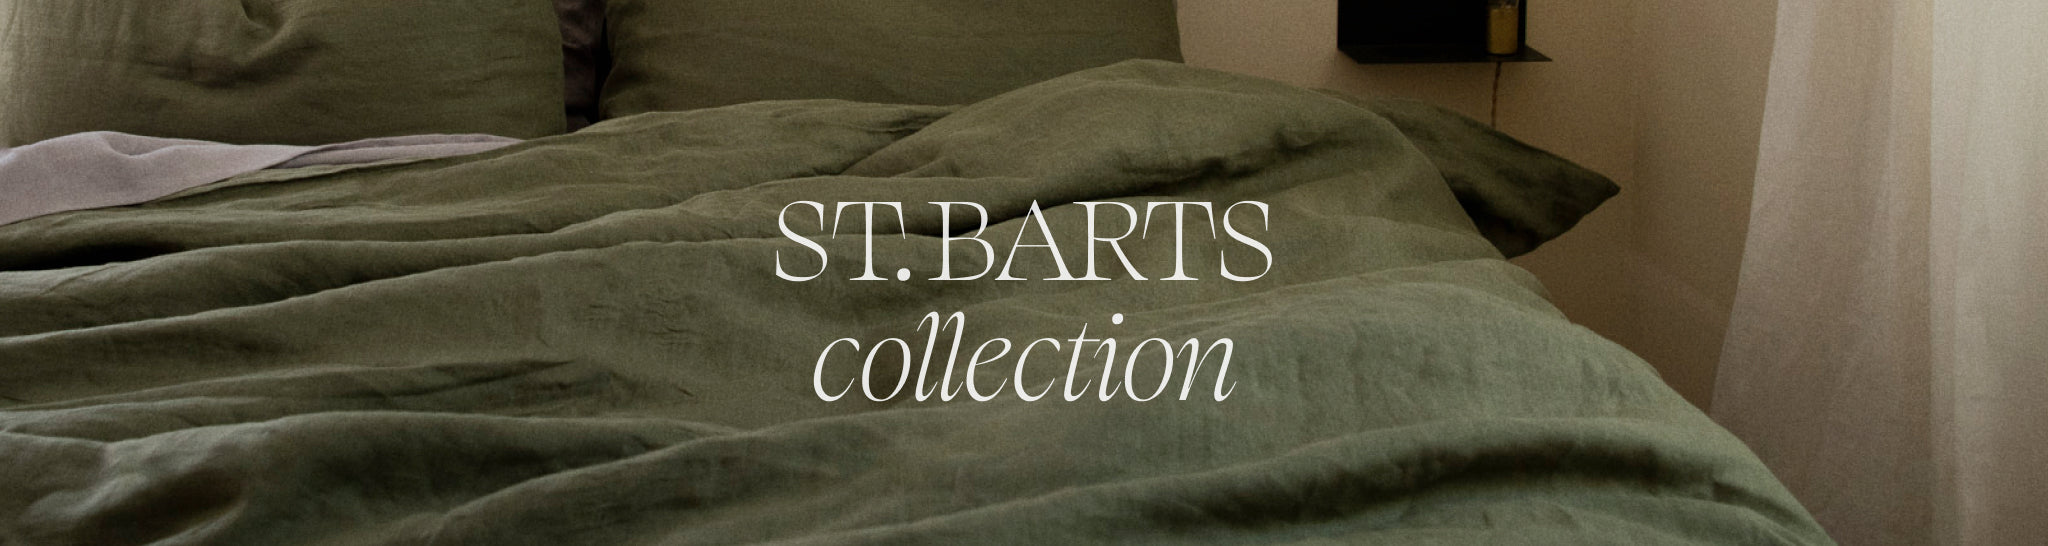 St. Barts Collection